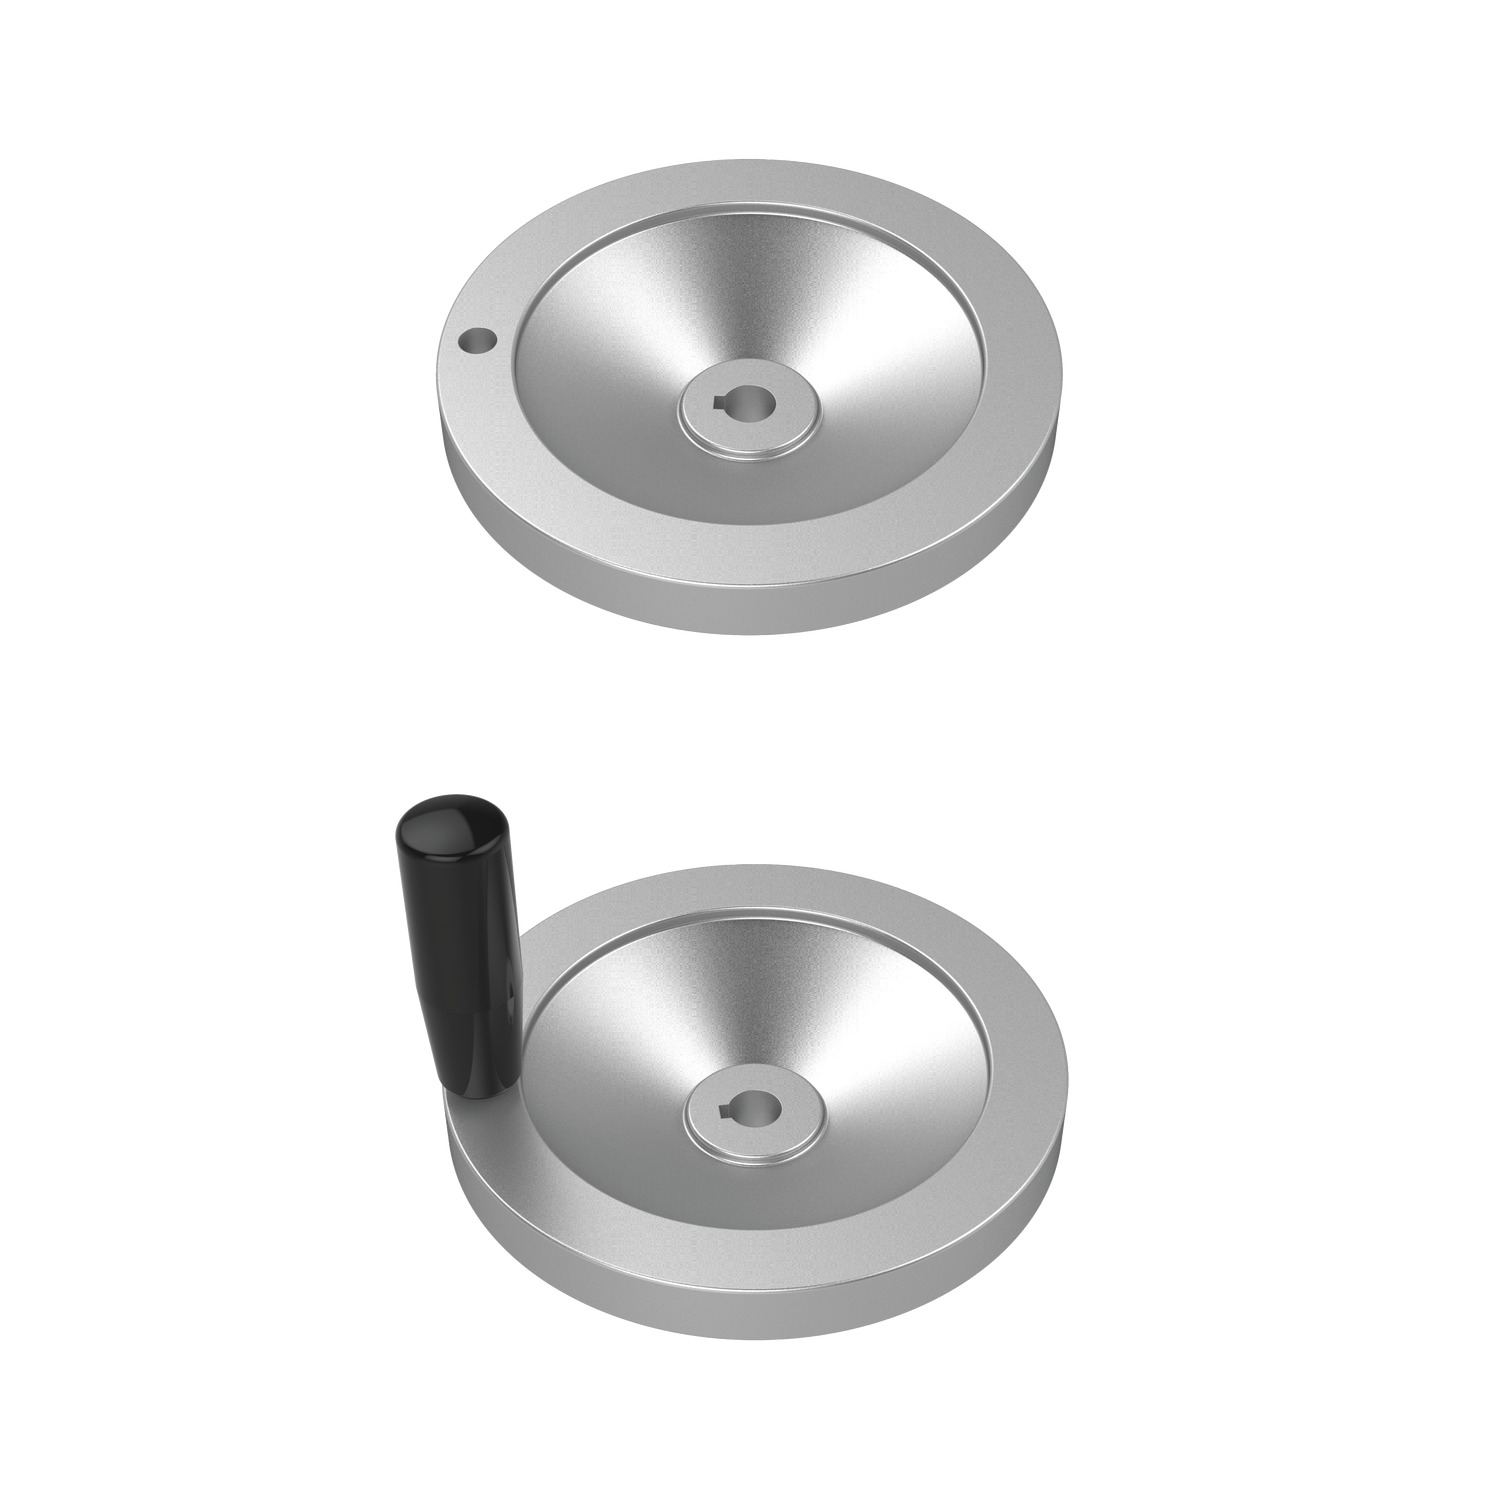 Disc Type Handwheels Disc type handwheels made from aluminium. Handle Available (made from duroplast black). Gripping indentations on rear side.